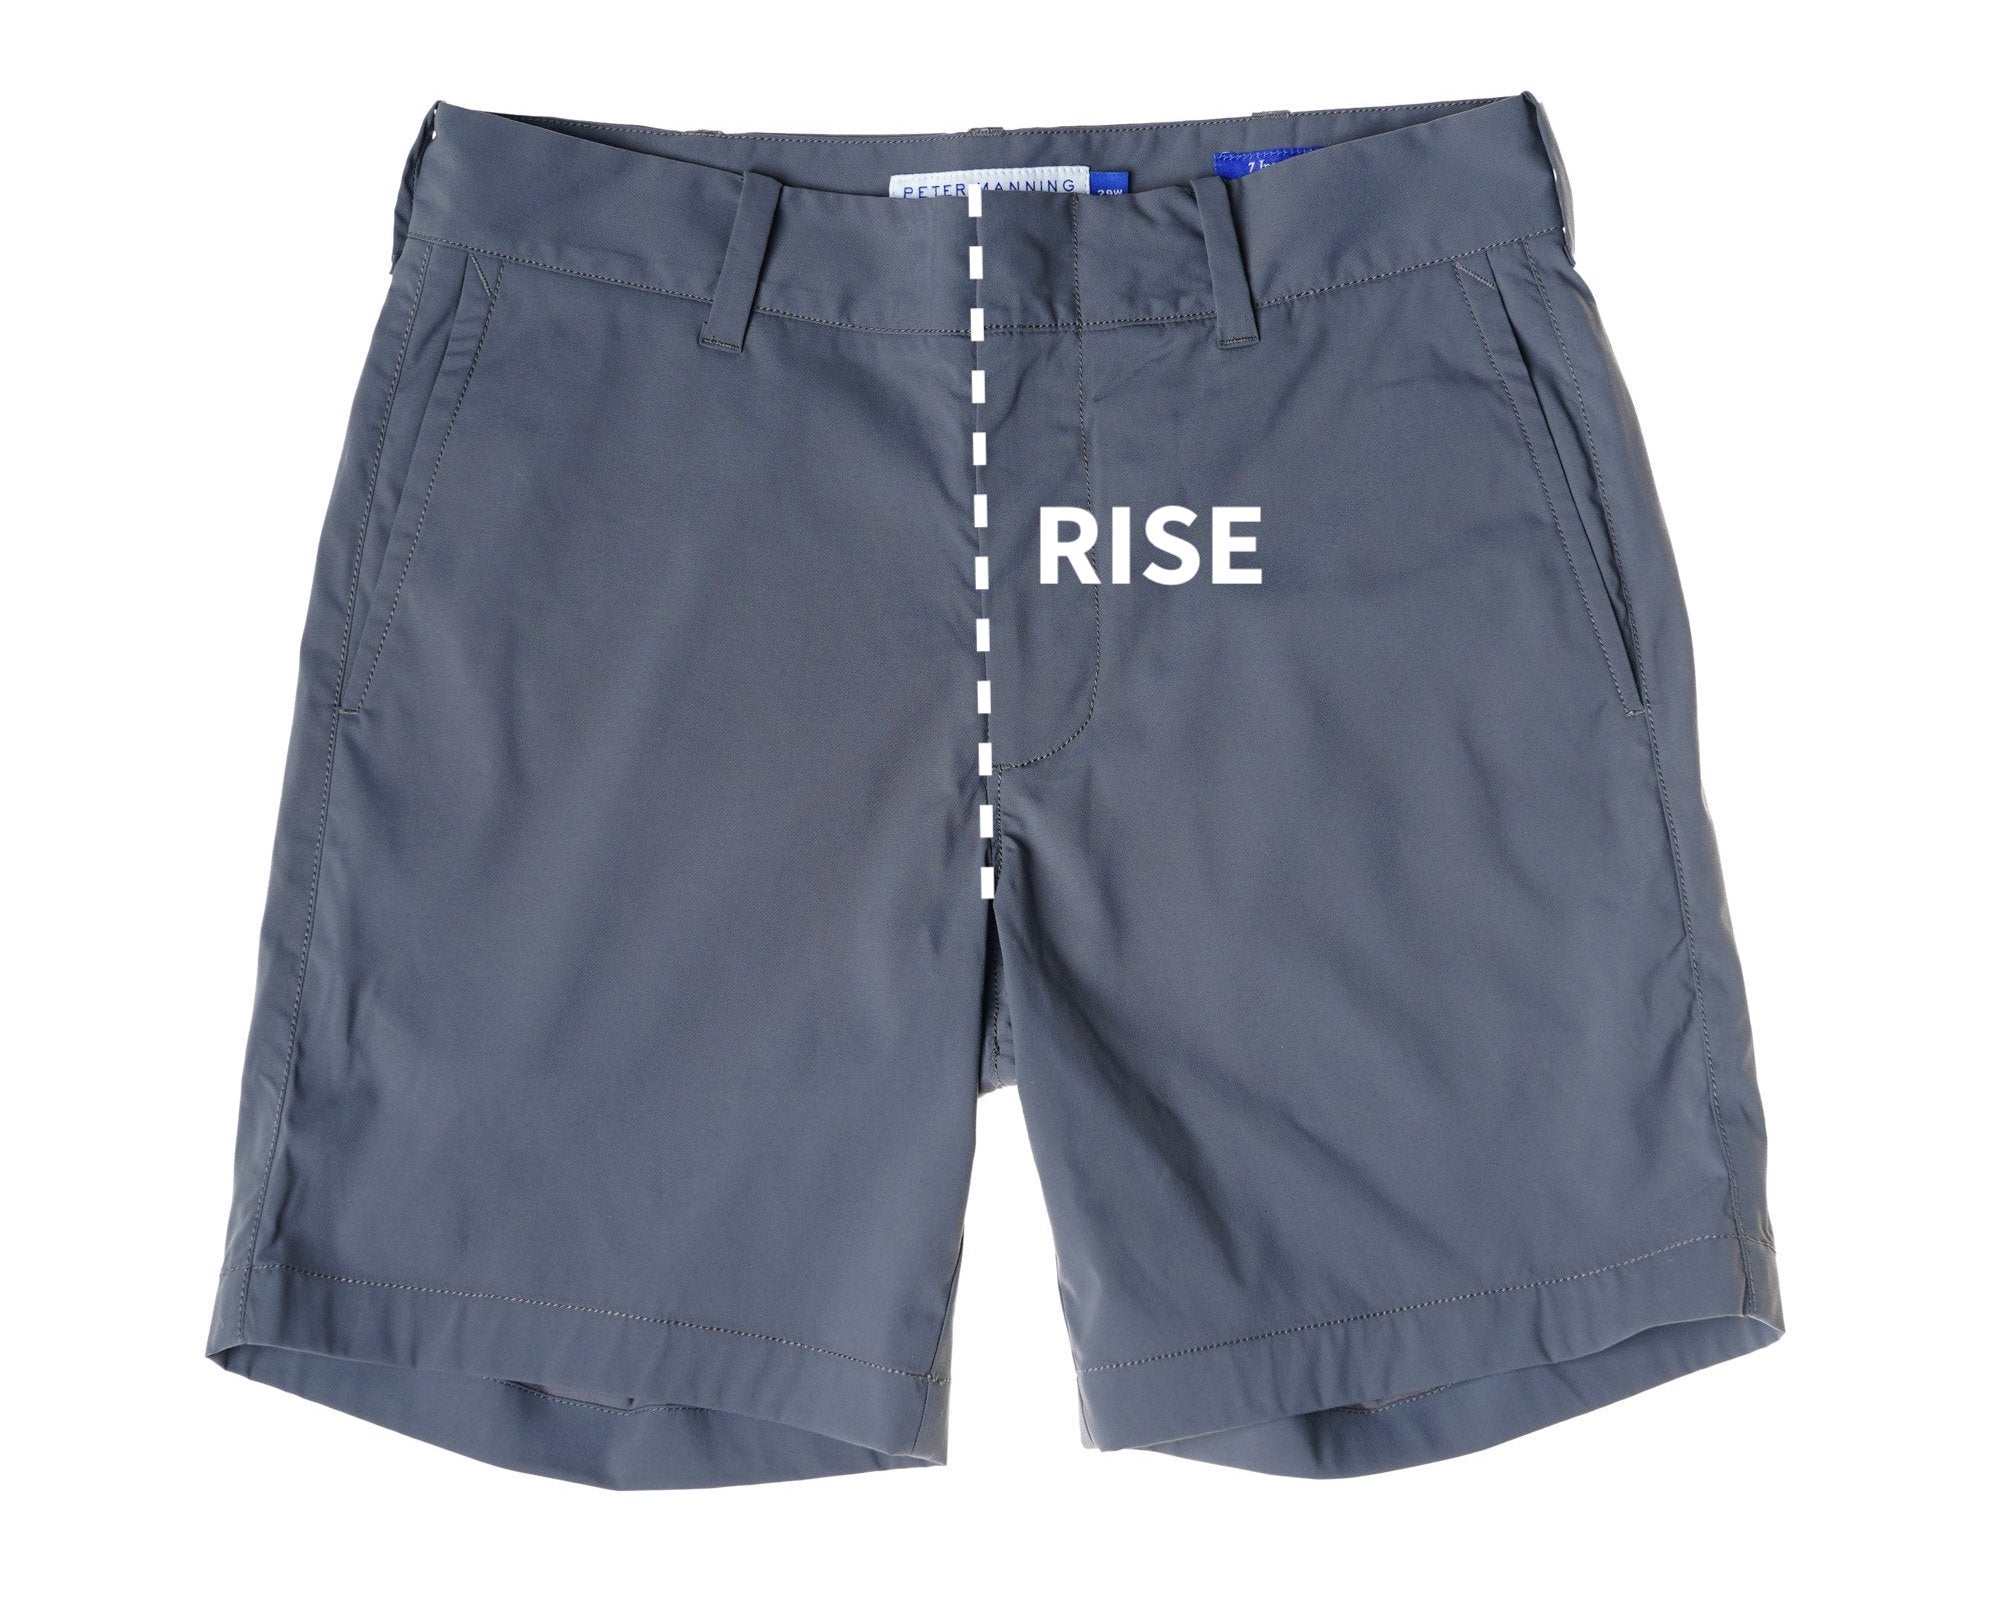 Shorts front rise